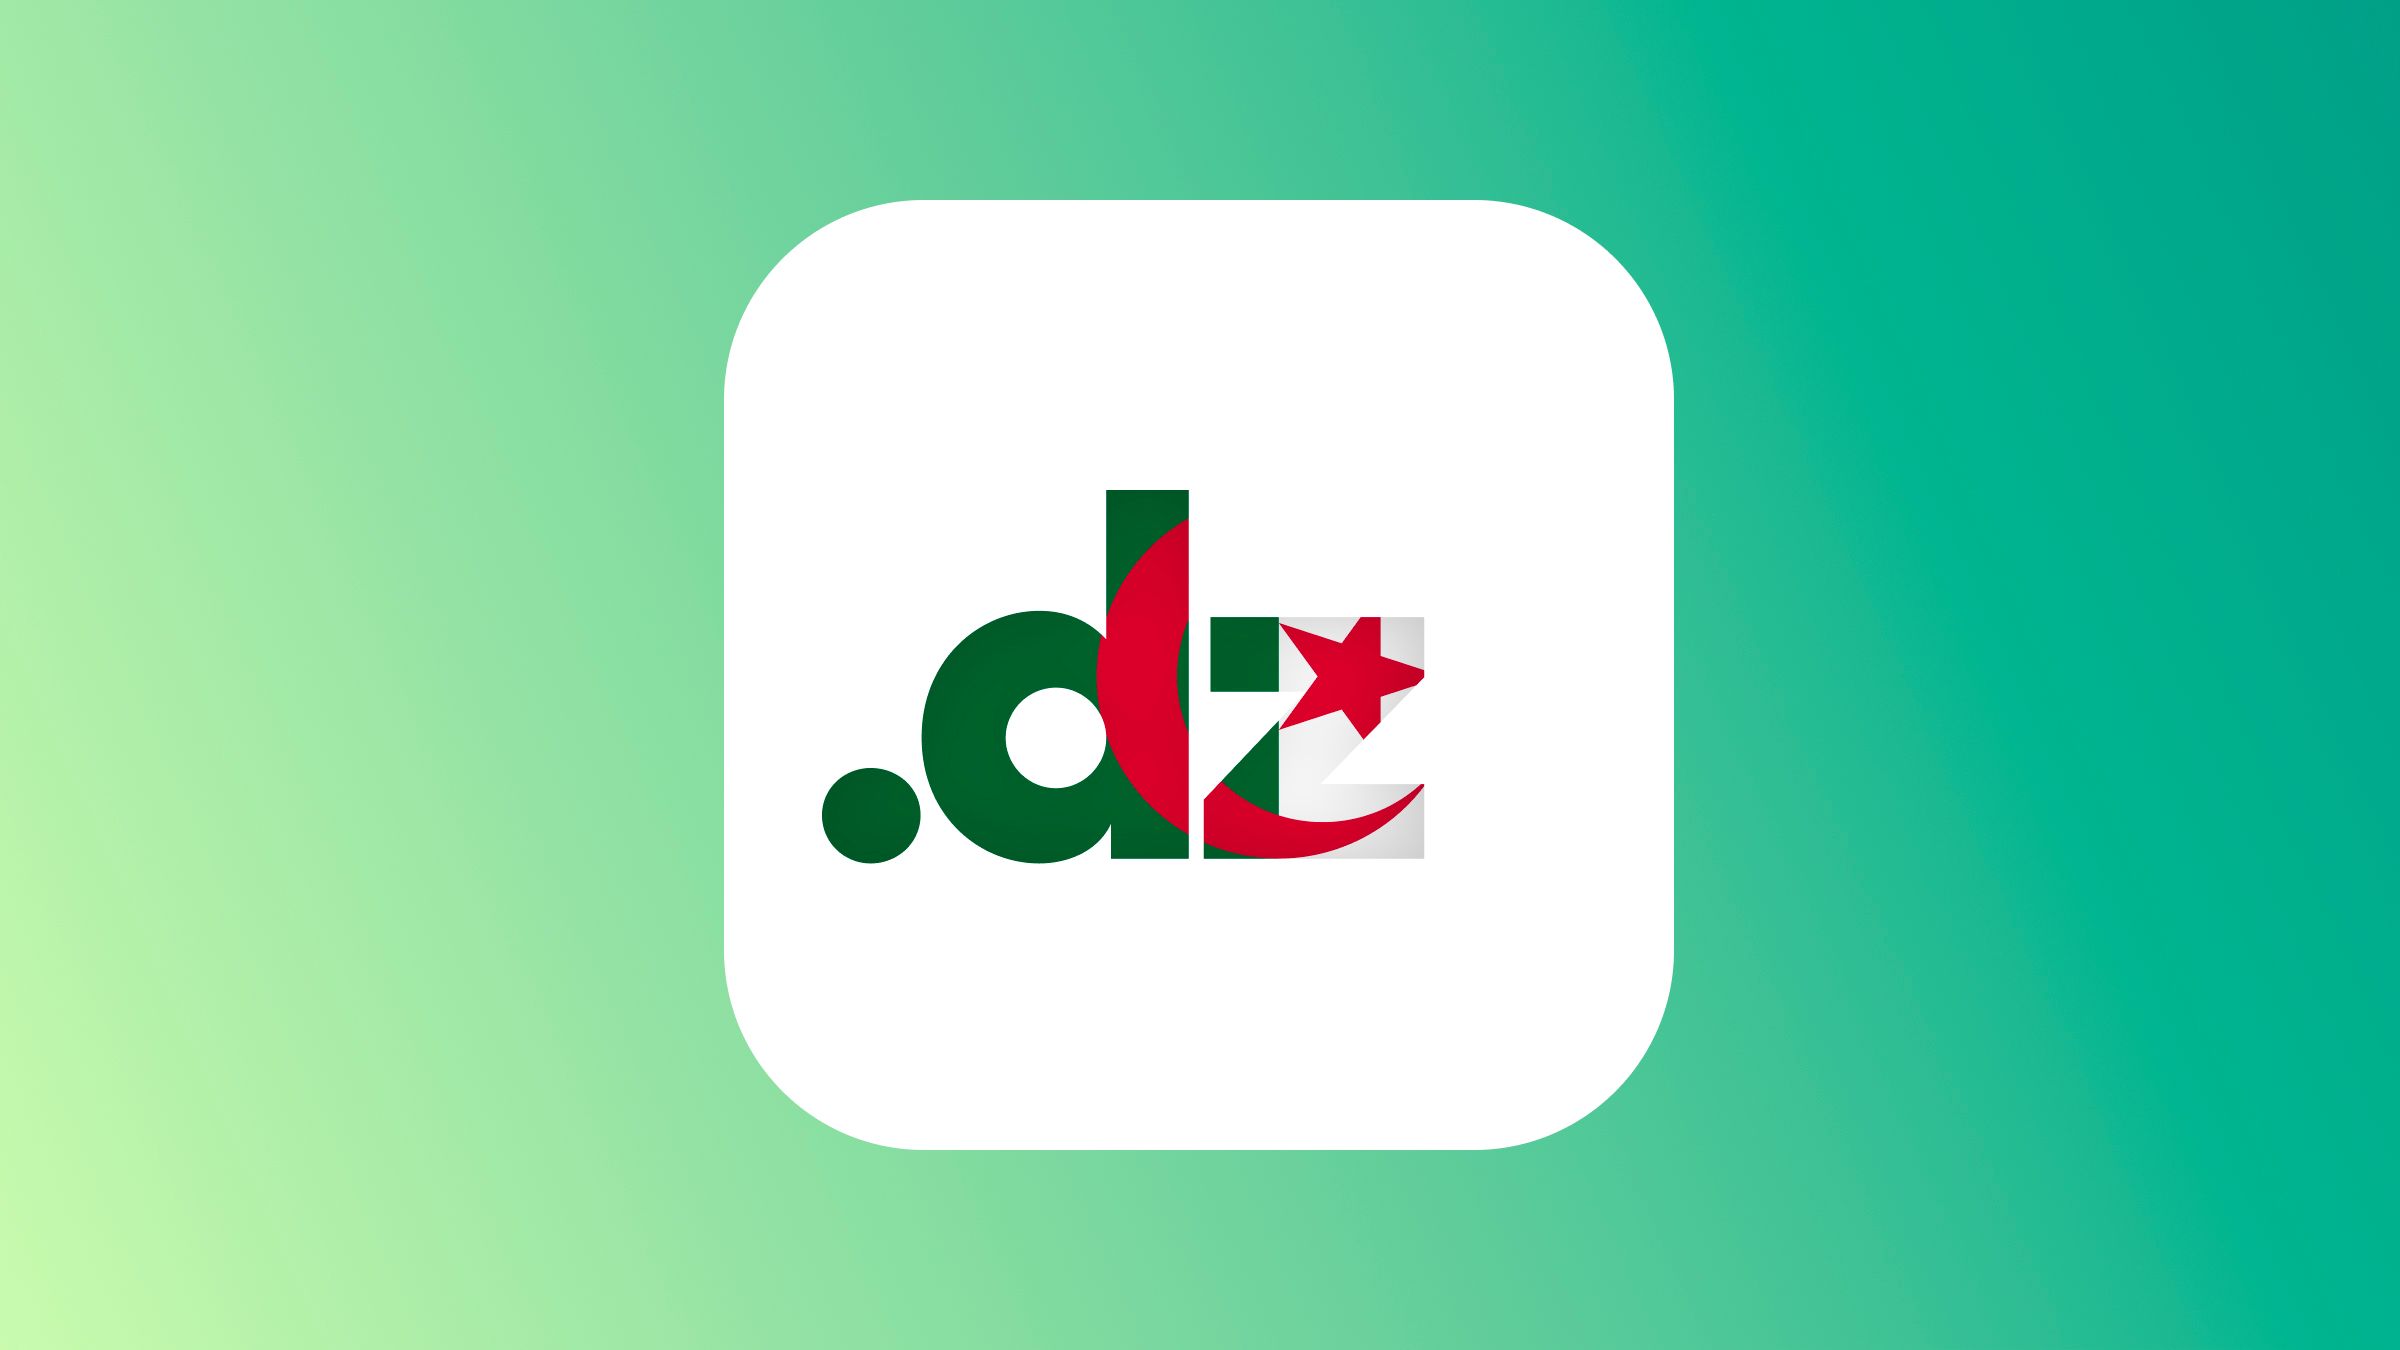 The .dz domain embodies Algeria’s digital identity, imparting strategic significance to institutions, businesses, and organizations aiming to establish their online presence under the colors of Algeria.